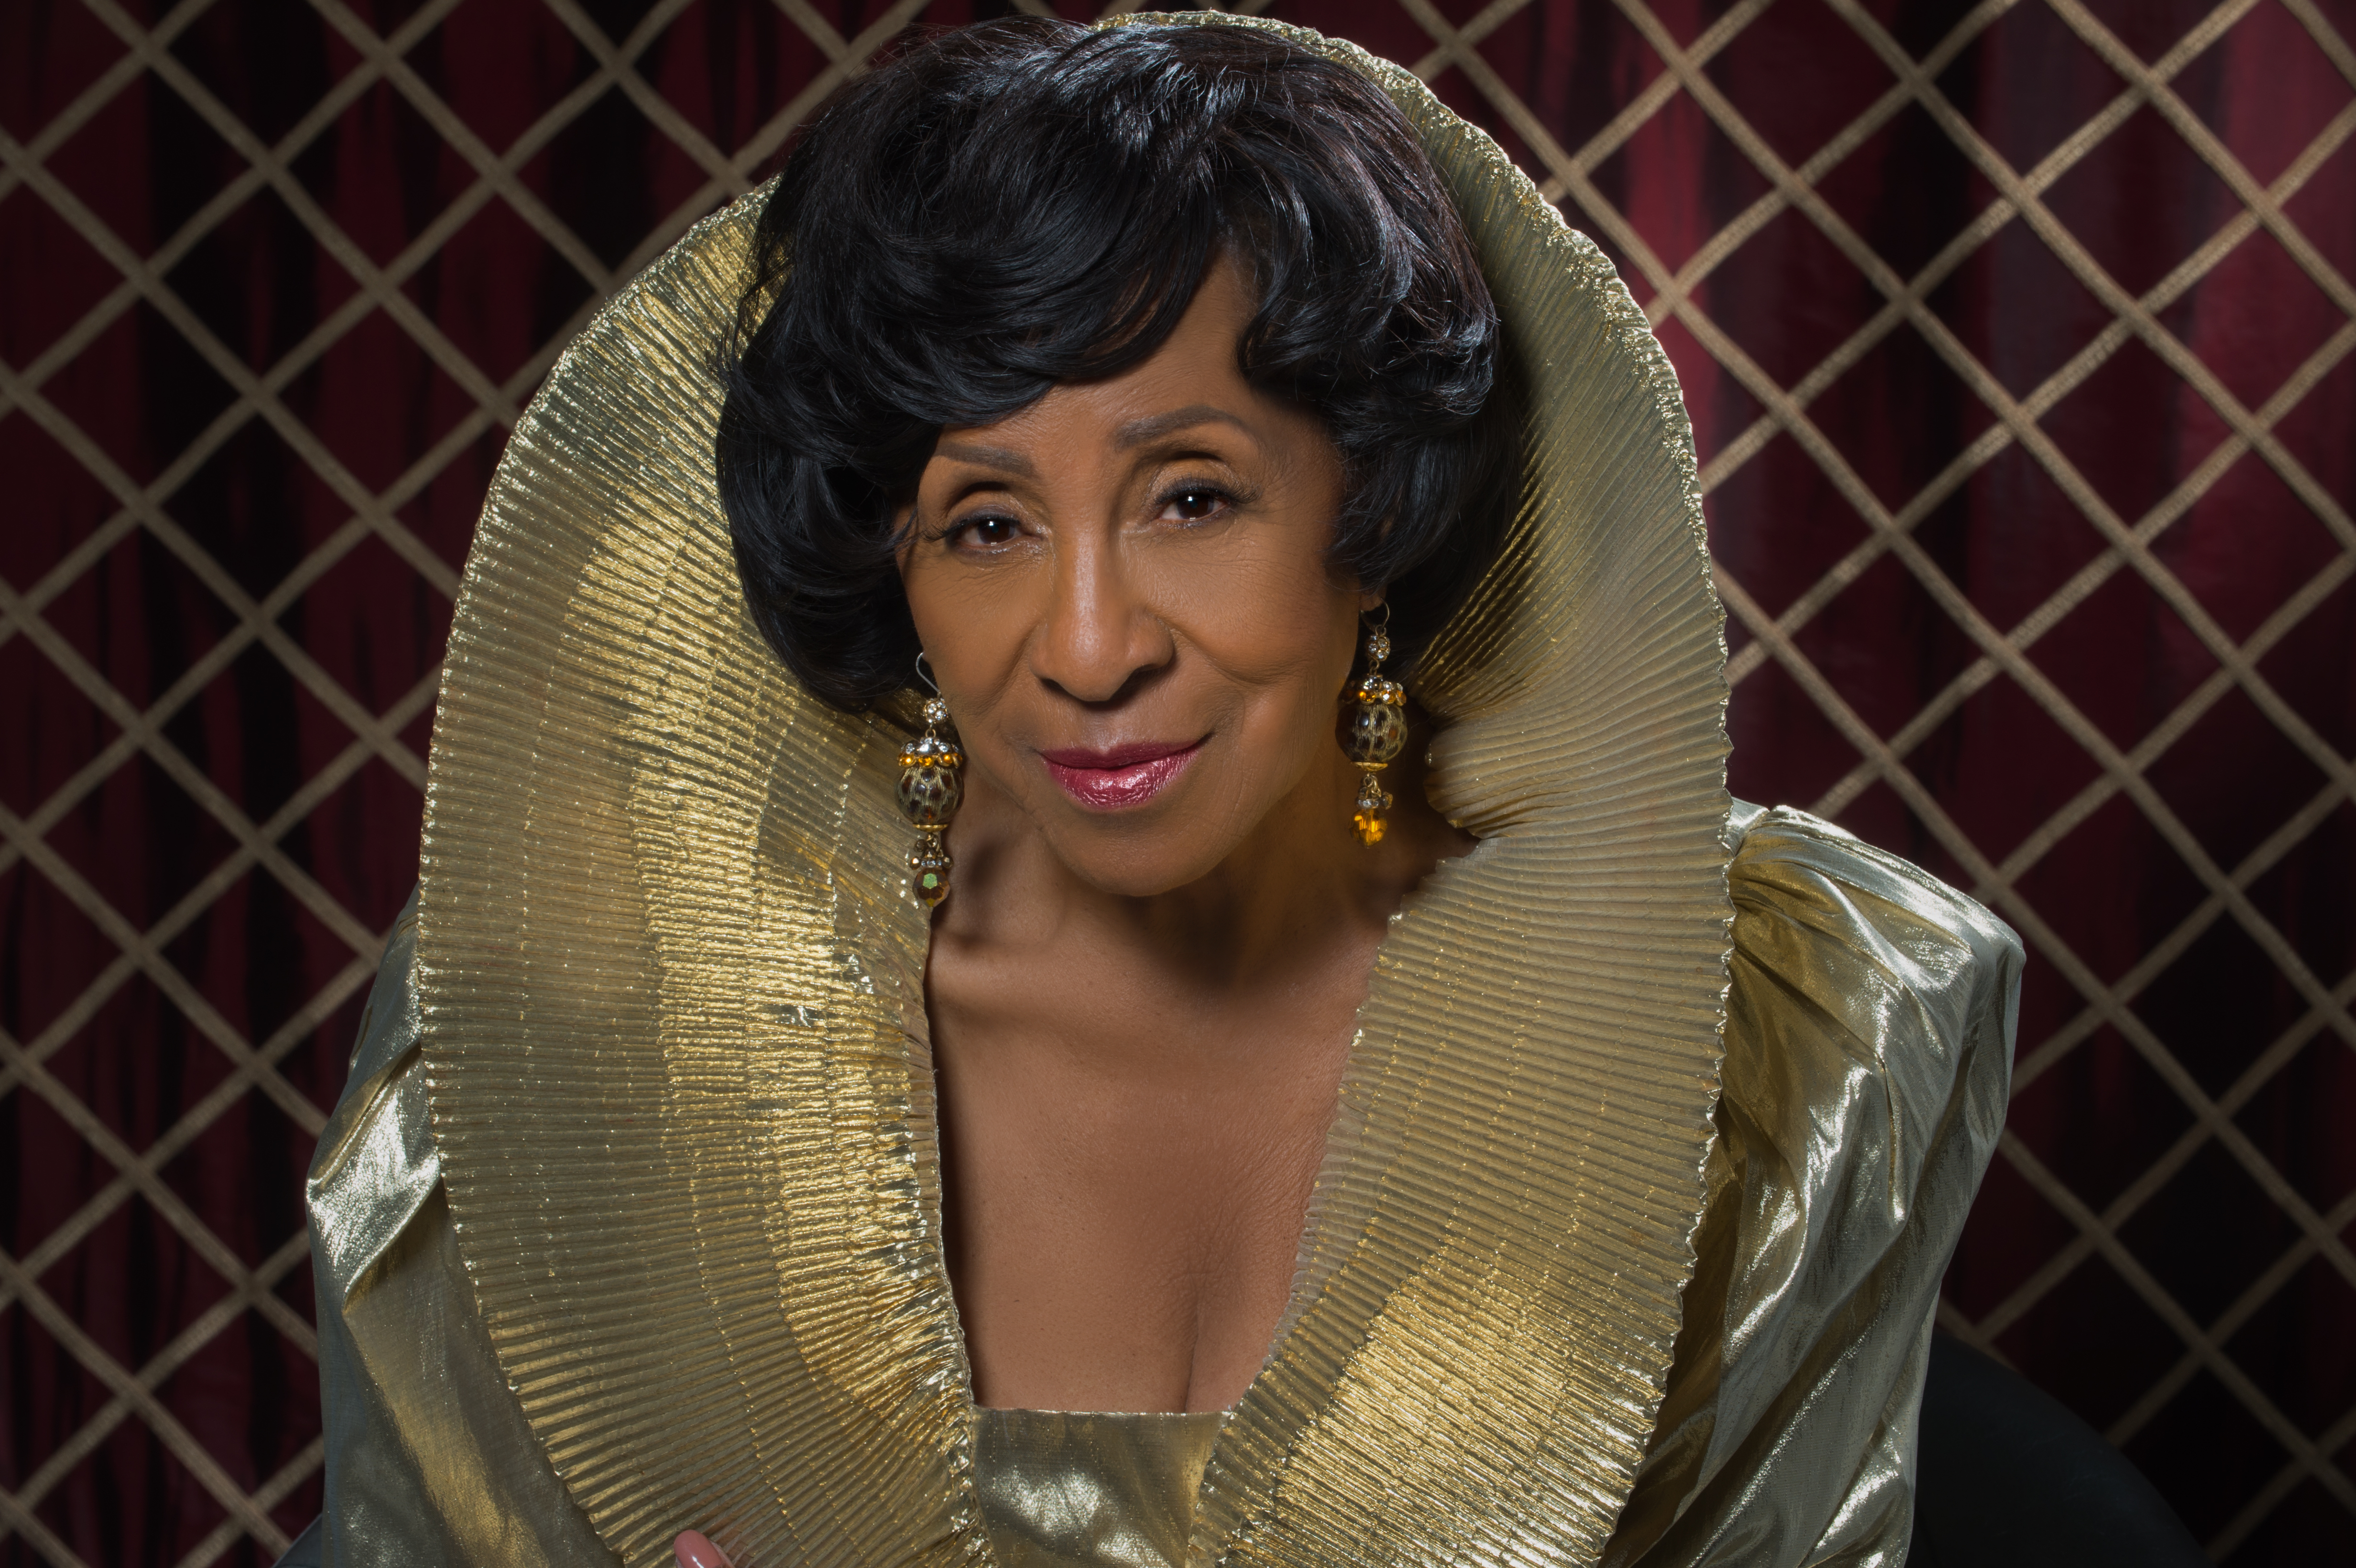 Black Hollywood: Carell Augustus creates Beautiful & Provocative Images, Marla Gibbs, from the Jeffersons ,Reimagining Iconic Movie Moments